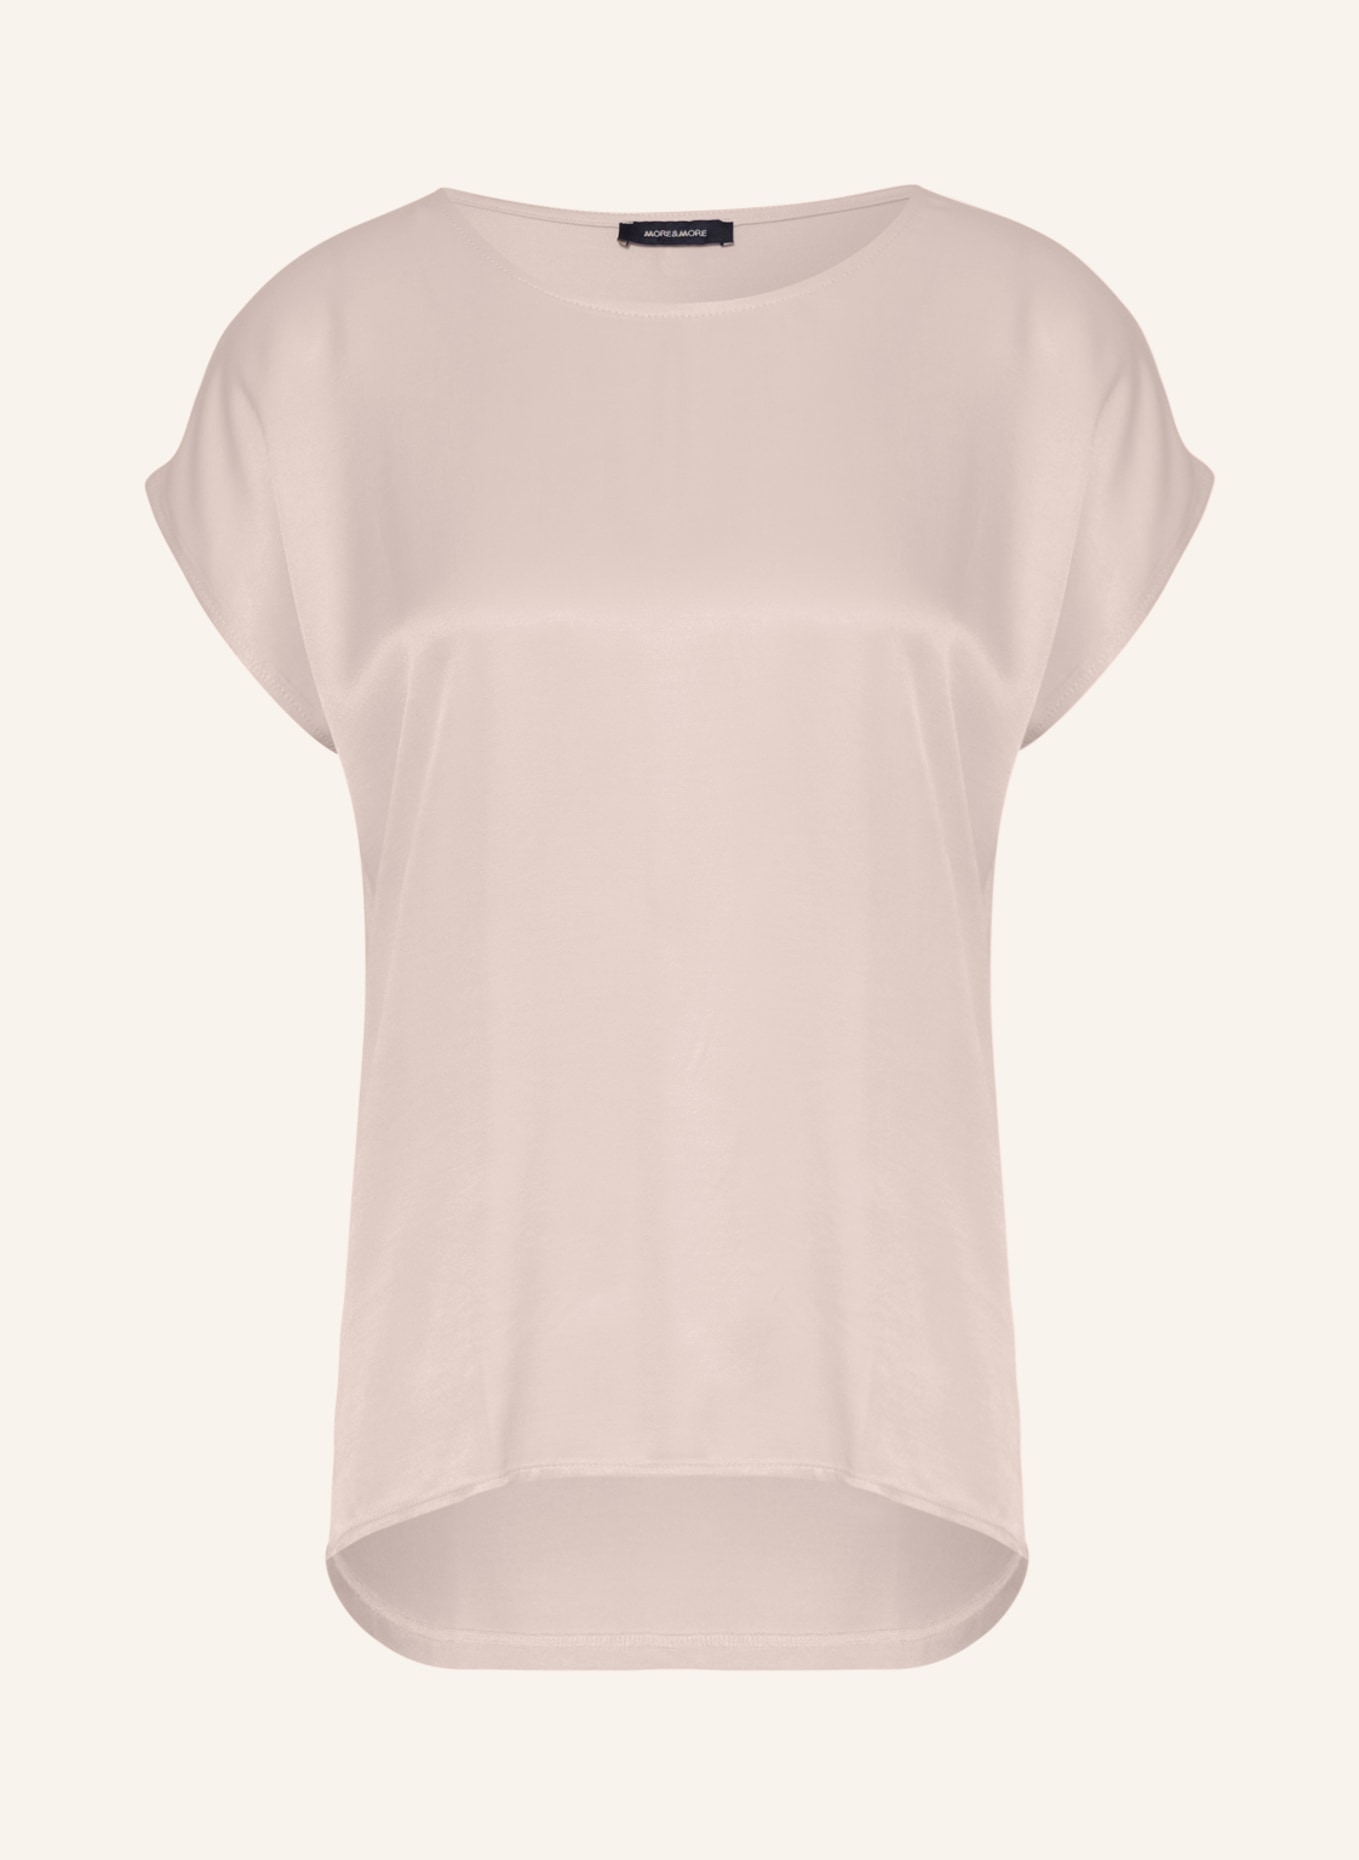 MORE & MORE Shirt blouse, Color: ROSE (Image 1)